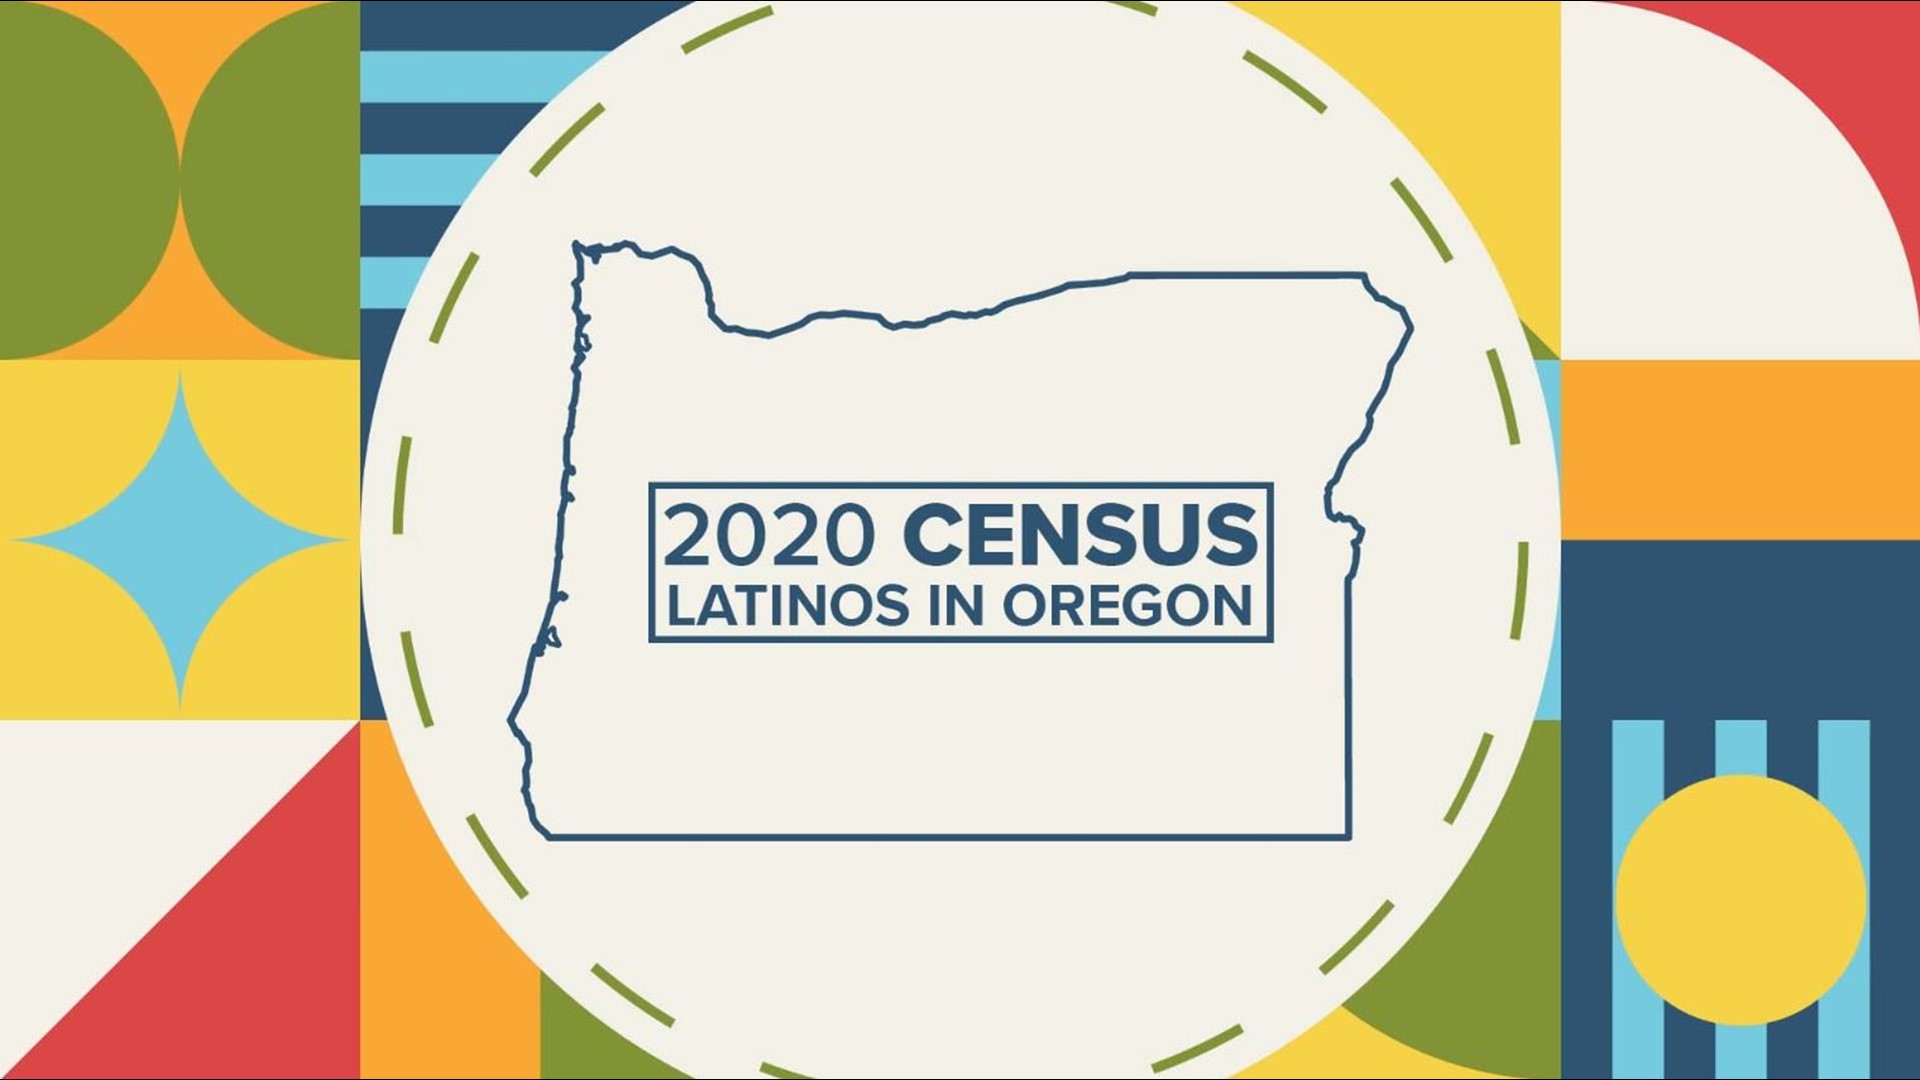 Oregon's Latino population grew by 31% from 2010-2020, a faster rate than the overall population. Meet the faces of this new Latino Landscape